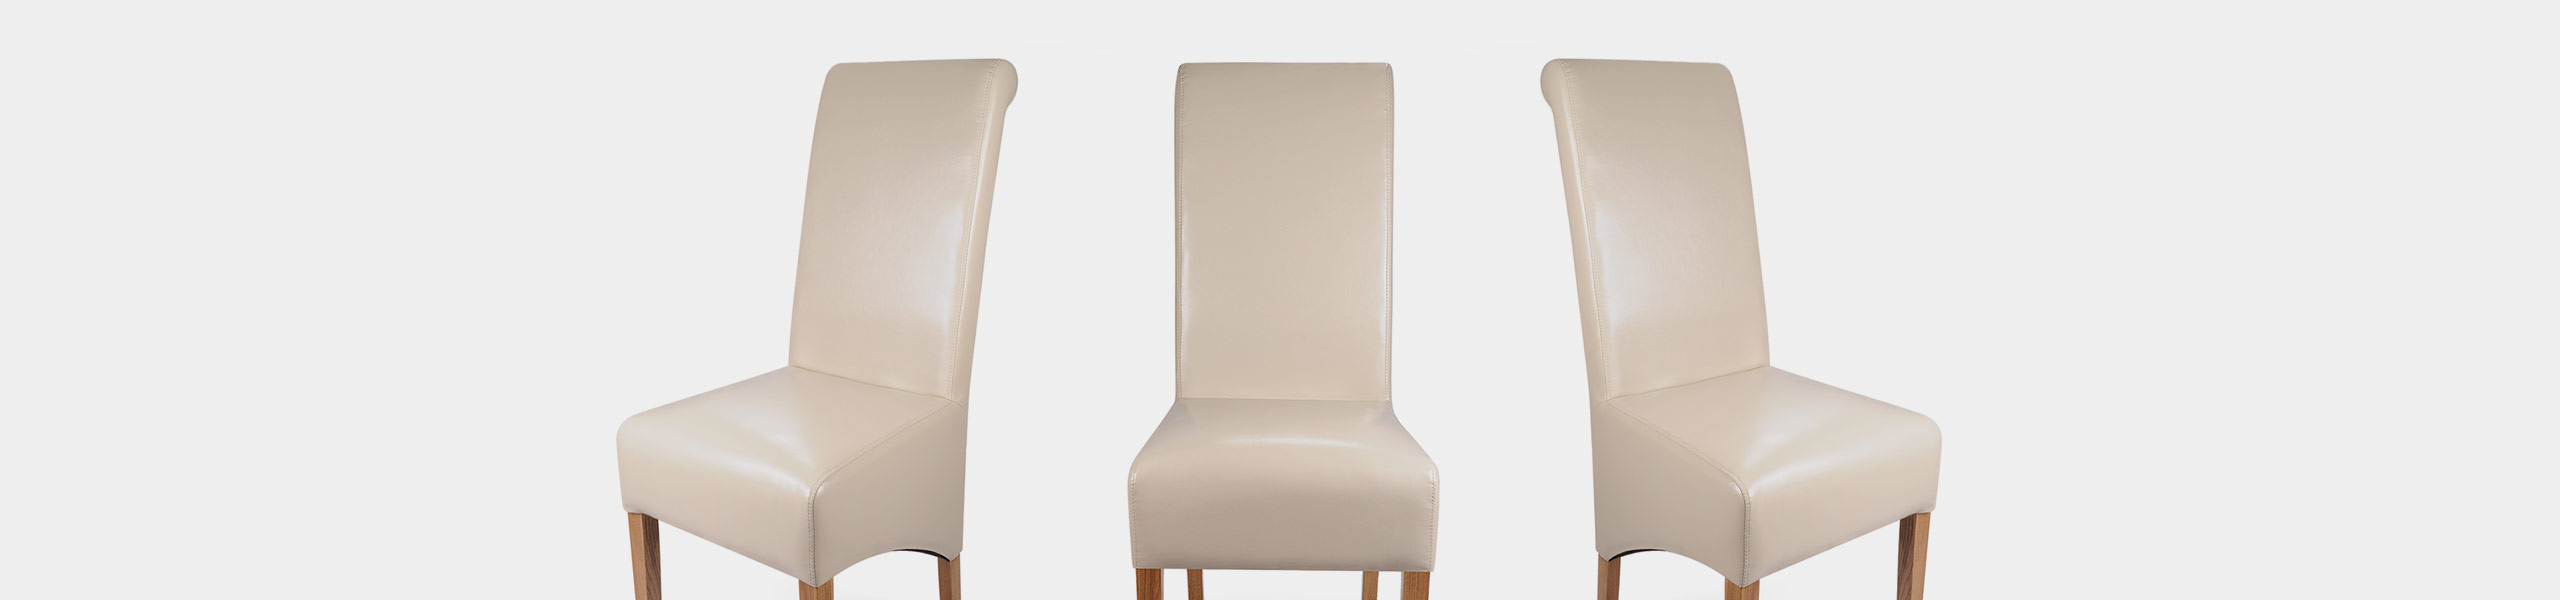 Krista Dining Chair Cream Leather Video Banner